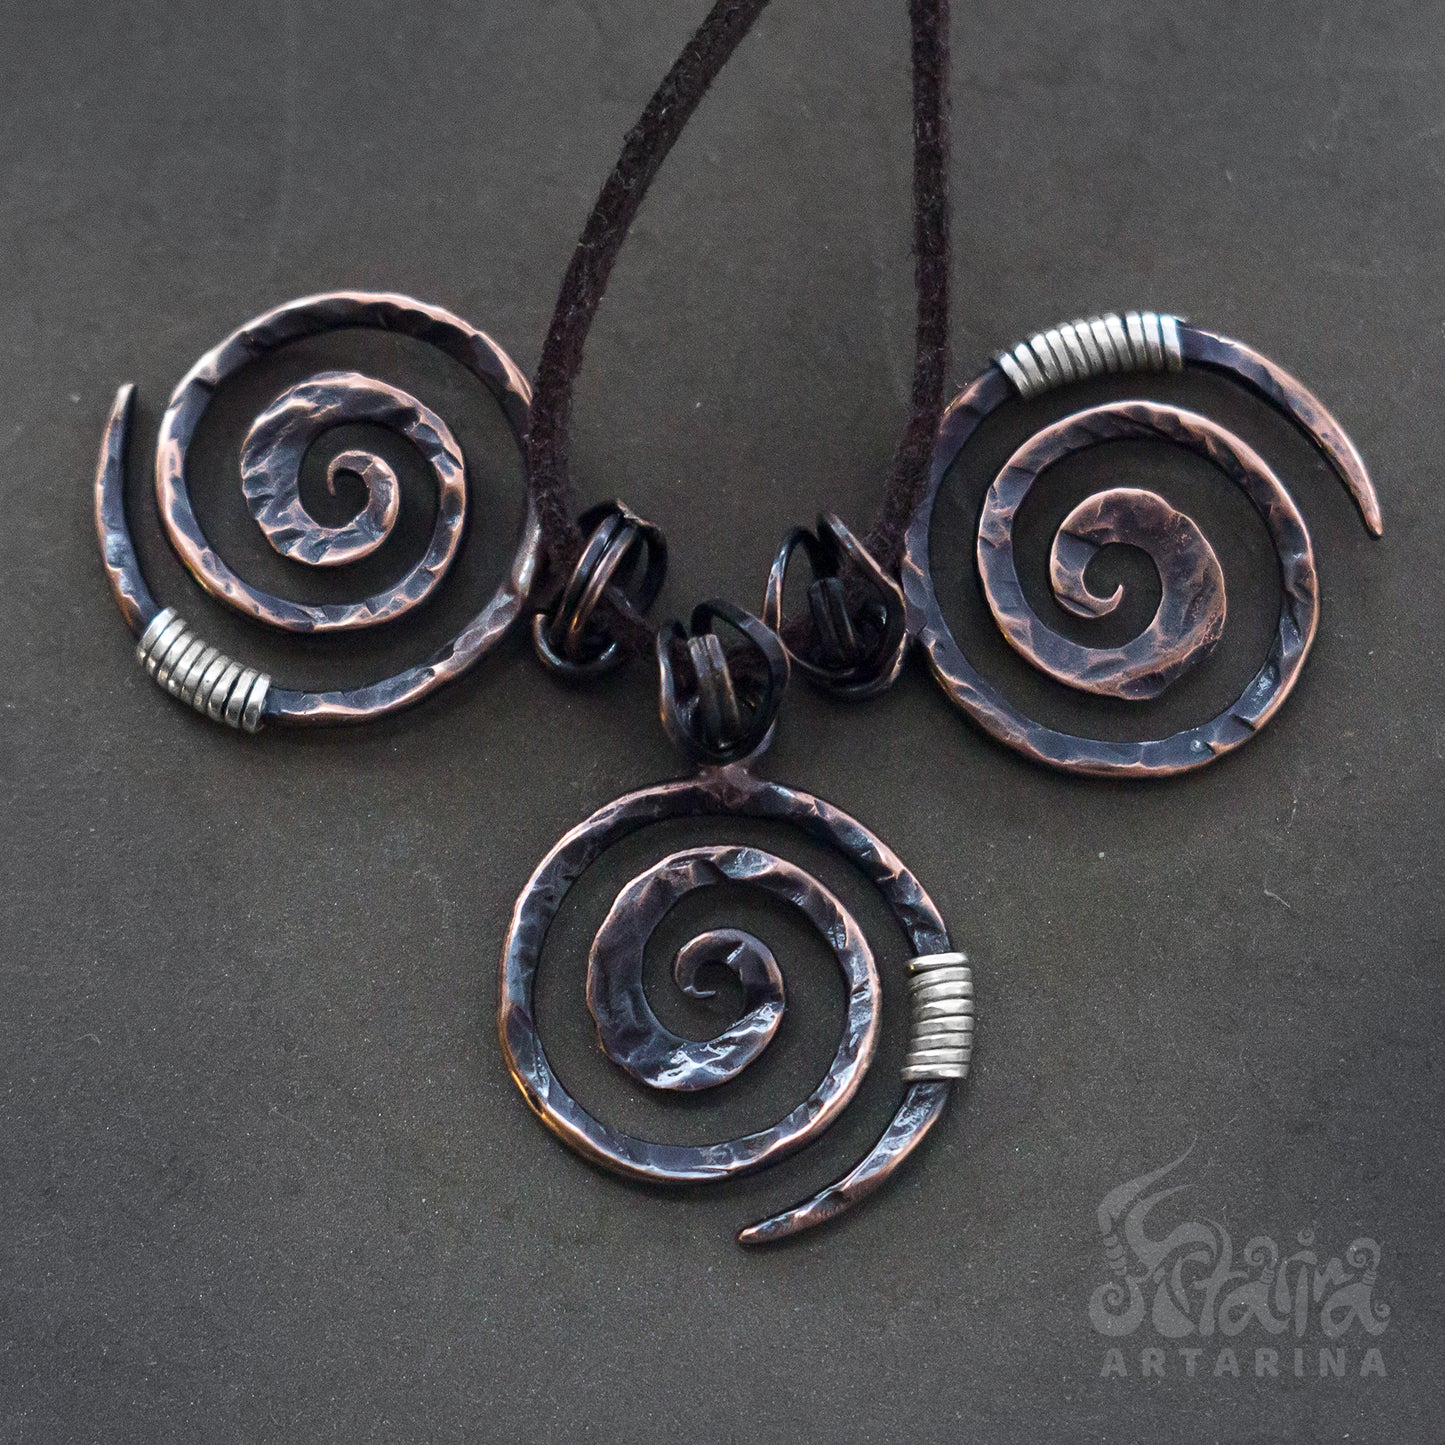 Oxidized rustic copper hammered spiral necklace / Rustic boho sacred symbol necklace pic 2